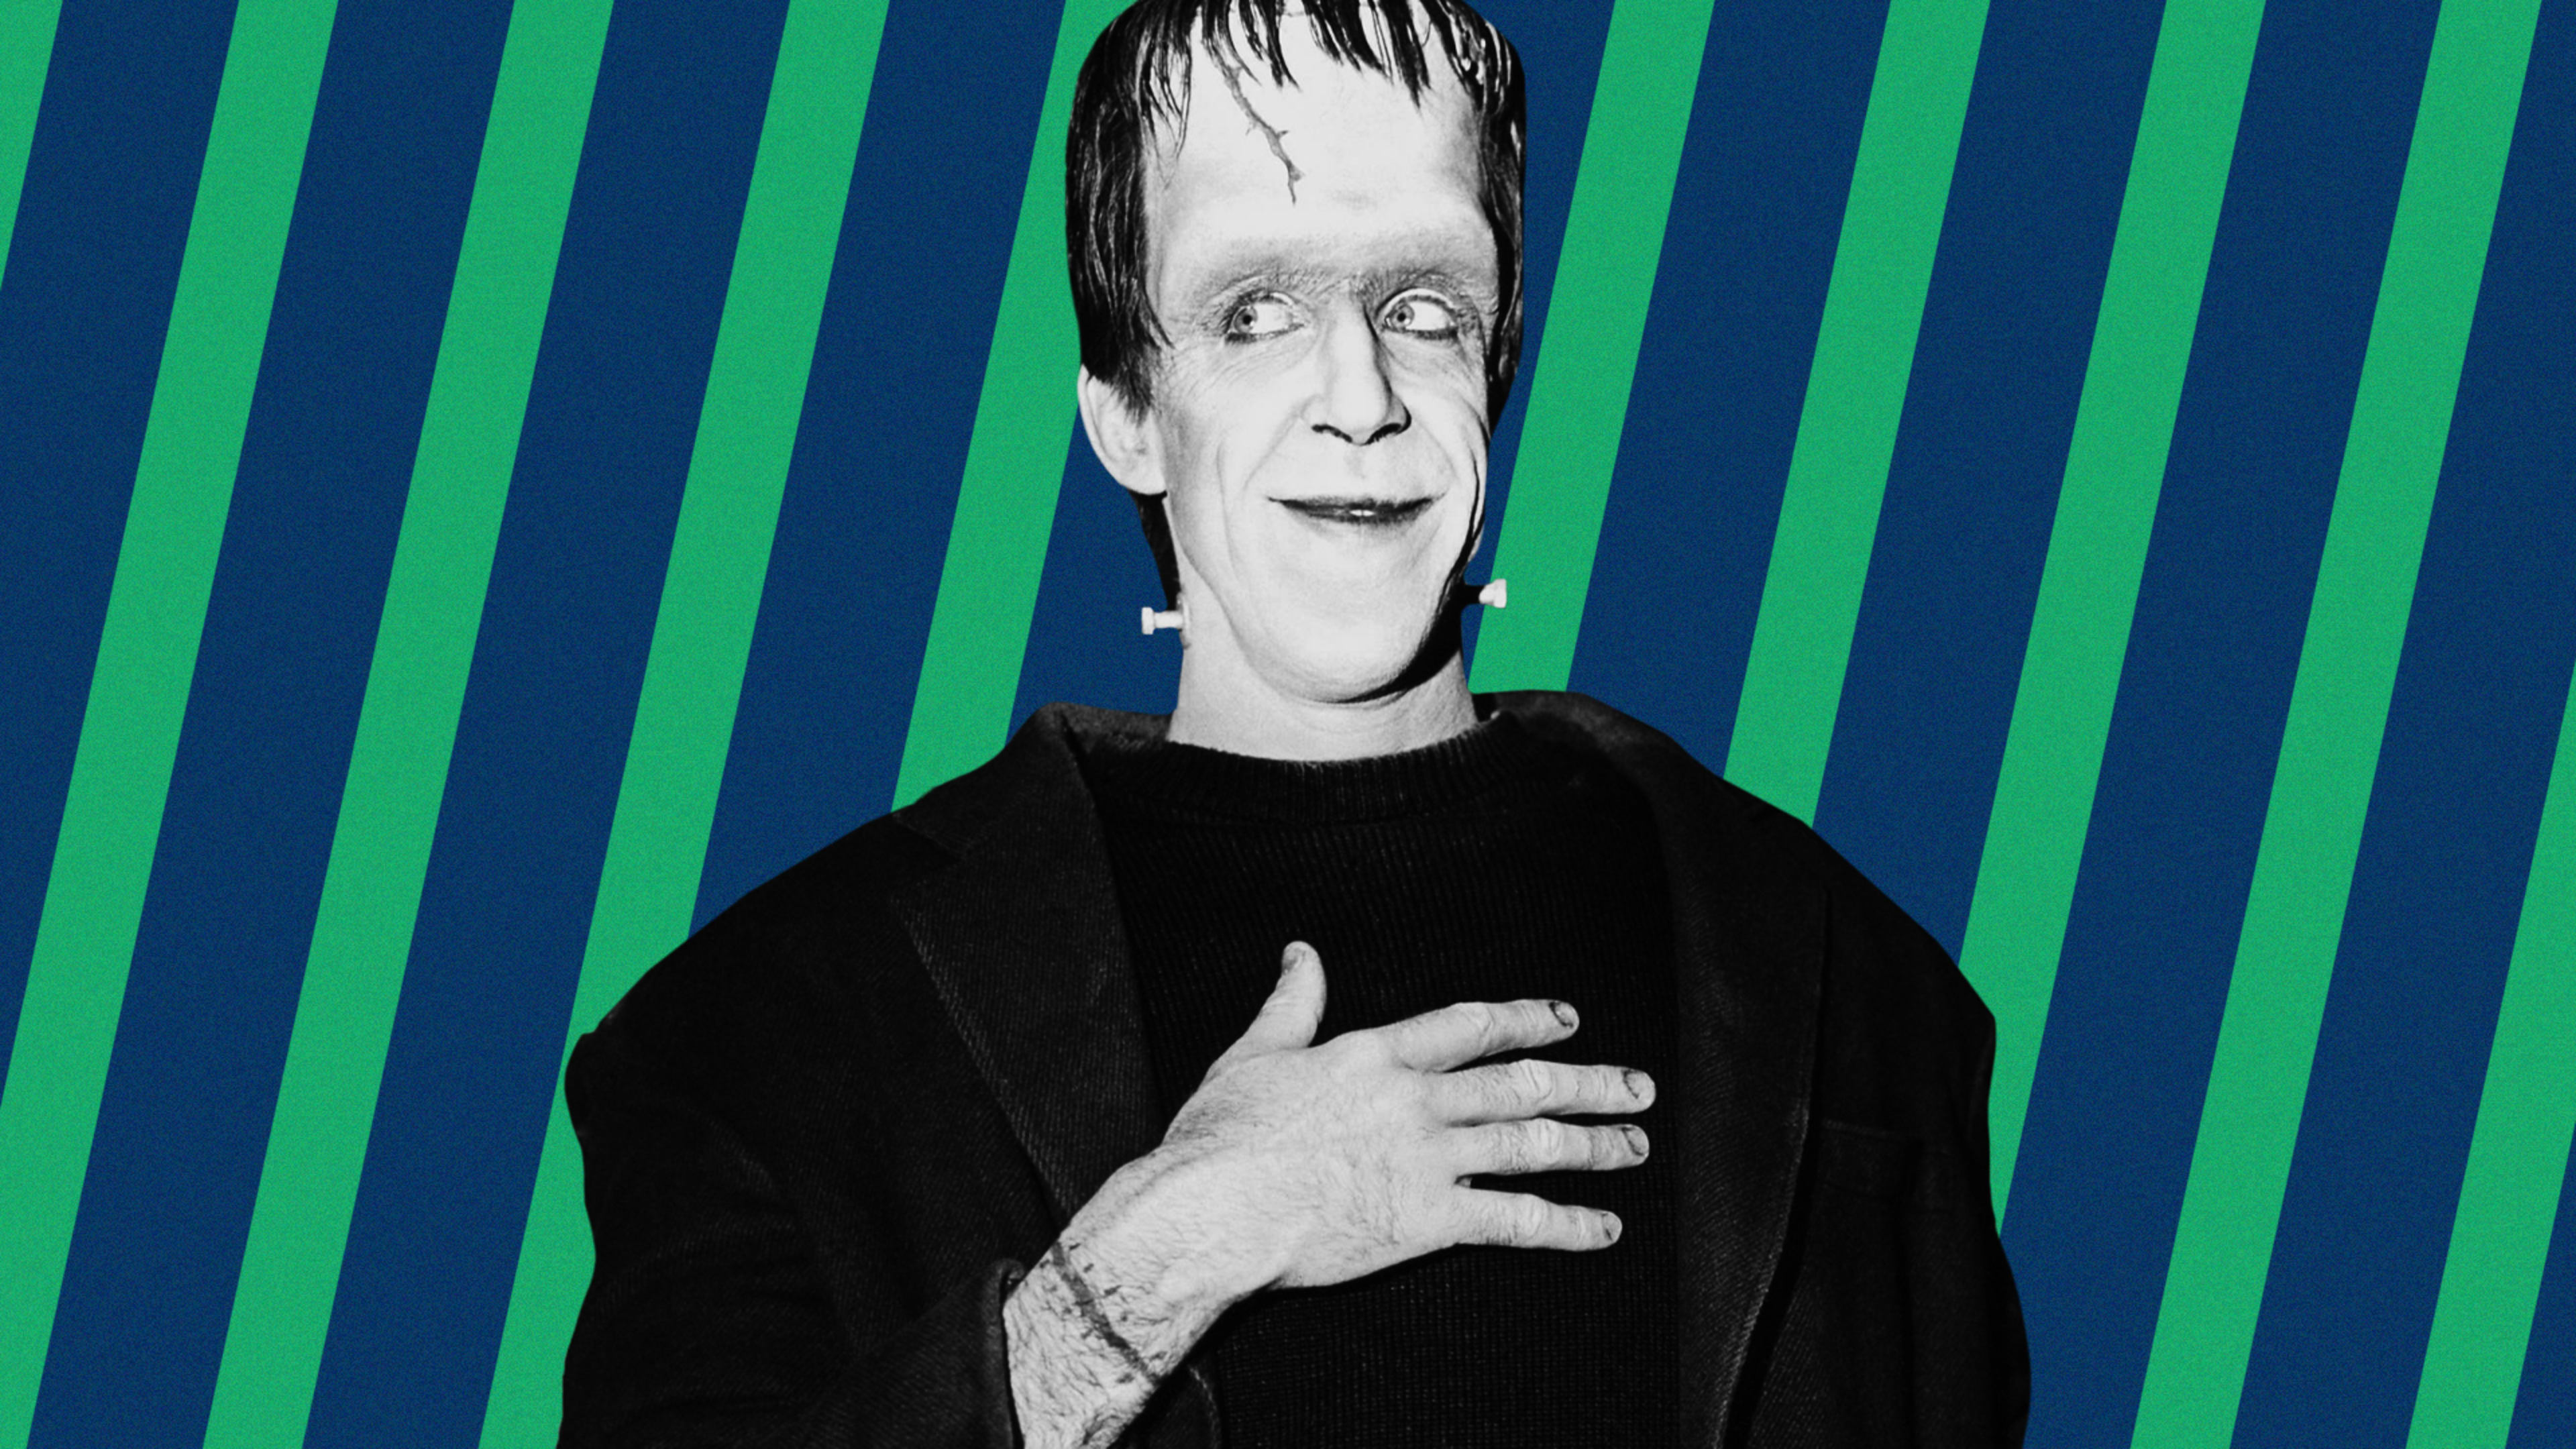 People are finding comfort in the words of Herman Munster. Yes, that Herman Munster